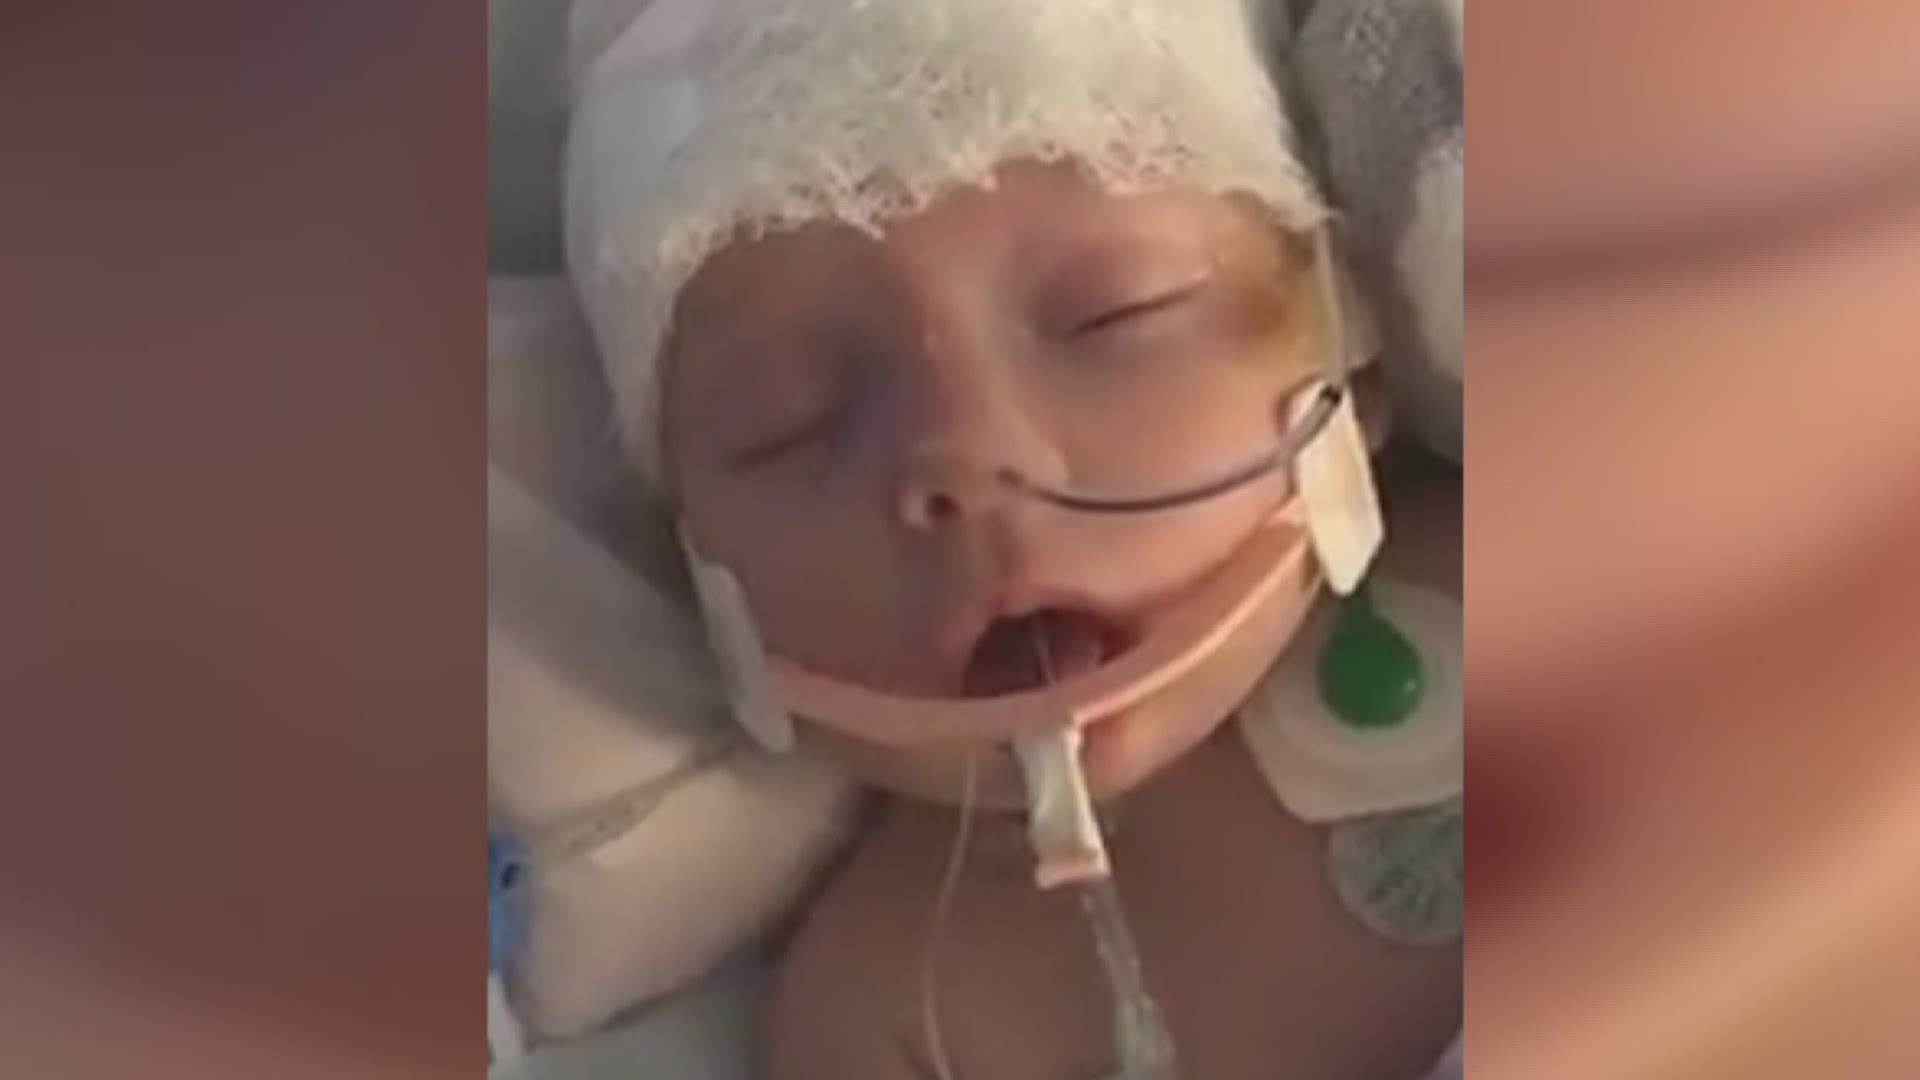 A baby recovering months after being hit on the head by a softball is going home. KWWL's Jessica Hartman has the latest on baby McKenna's recovery.